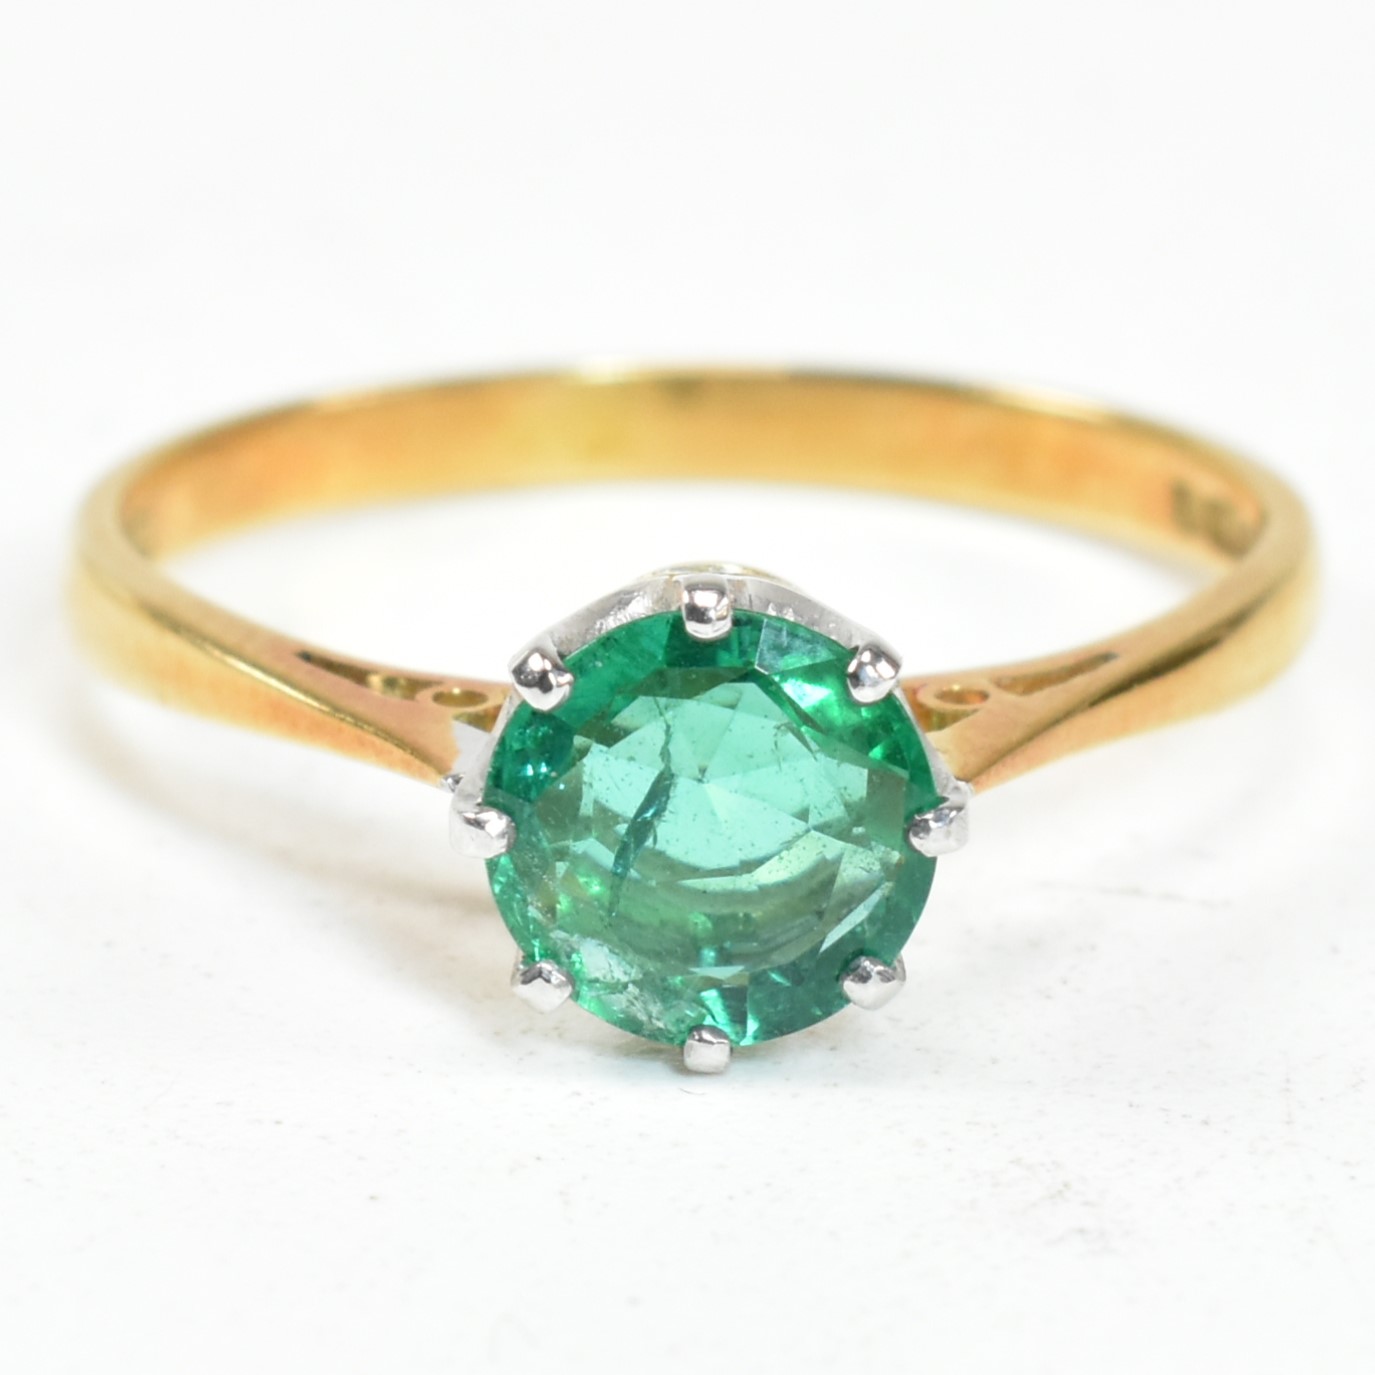 HALLMARKED 18CT GOLD & EMERALD SOLITAIRE RING